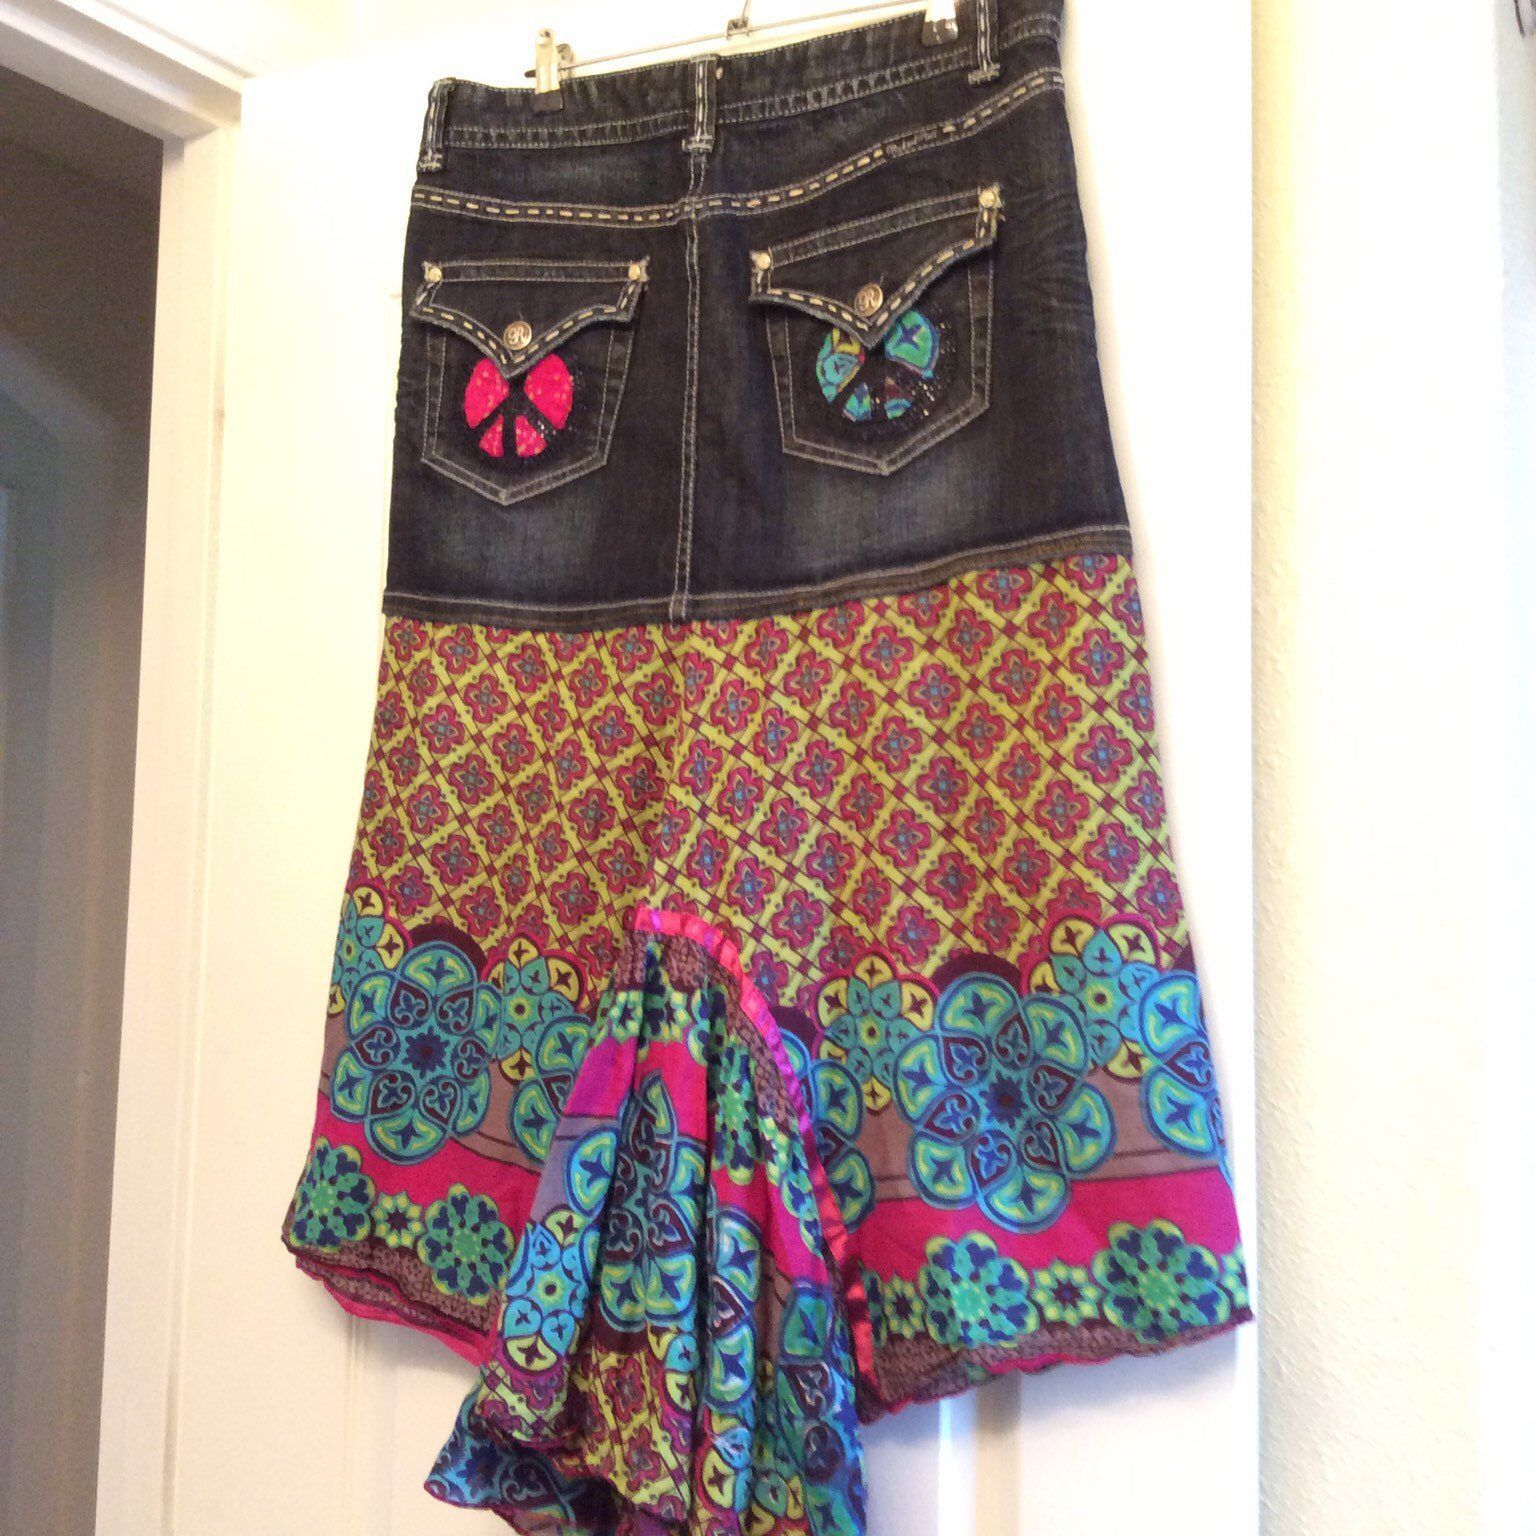 Jeans skirt, large, Funky, hippie boho upcycled -   15 DIY Clothes Hipster hippie ideas